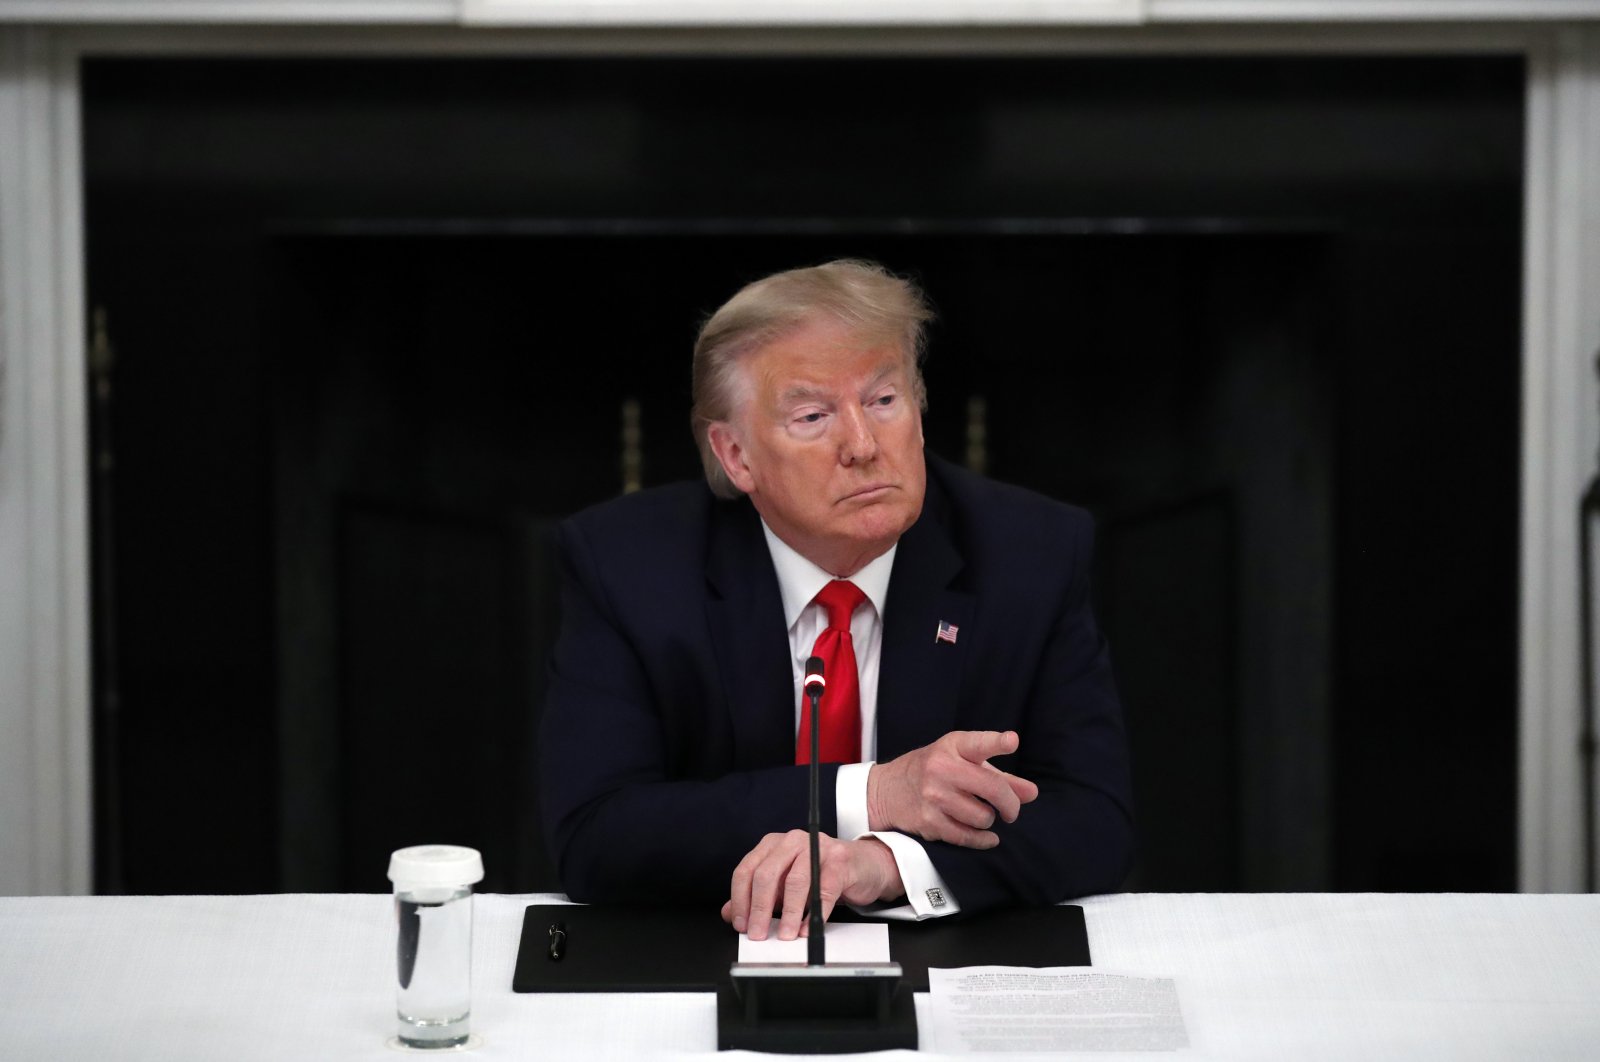 President Donald Trump listens during a roundtable with governors on the reopening of America's small businesses, in the State Dining Room of the White House, Thursday, June 18, 2020, in Washington. (AP Photo)